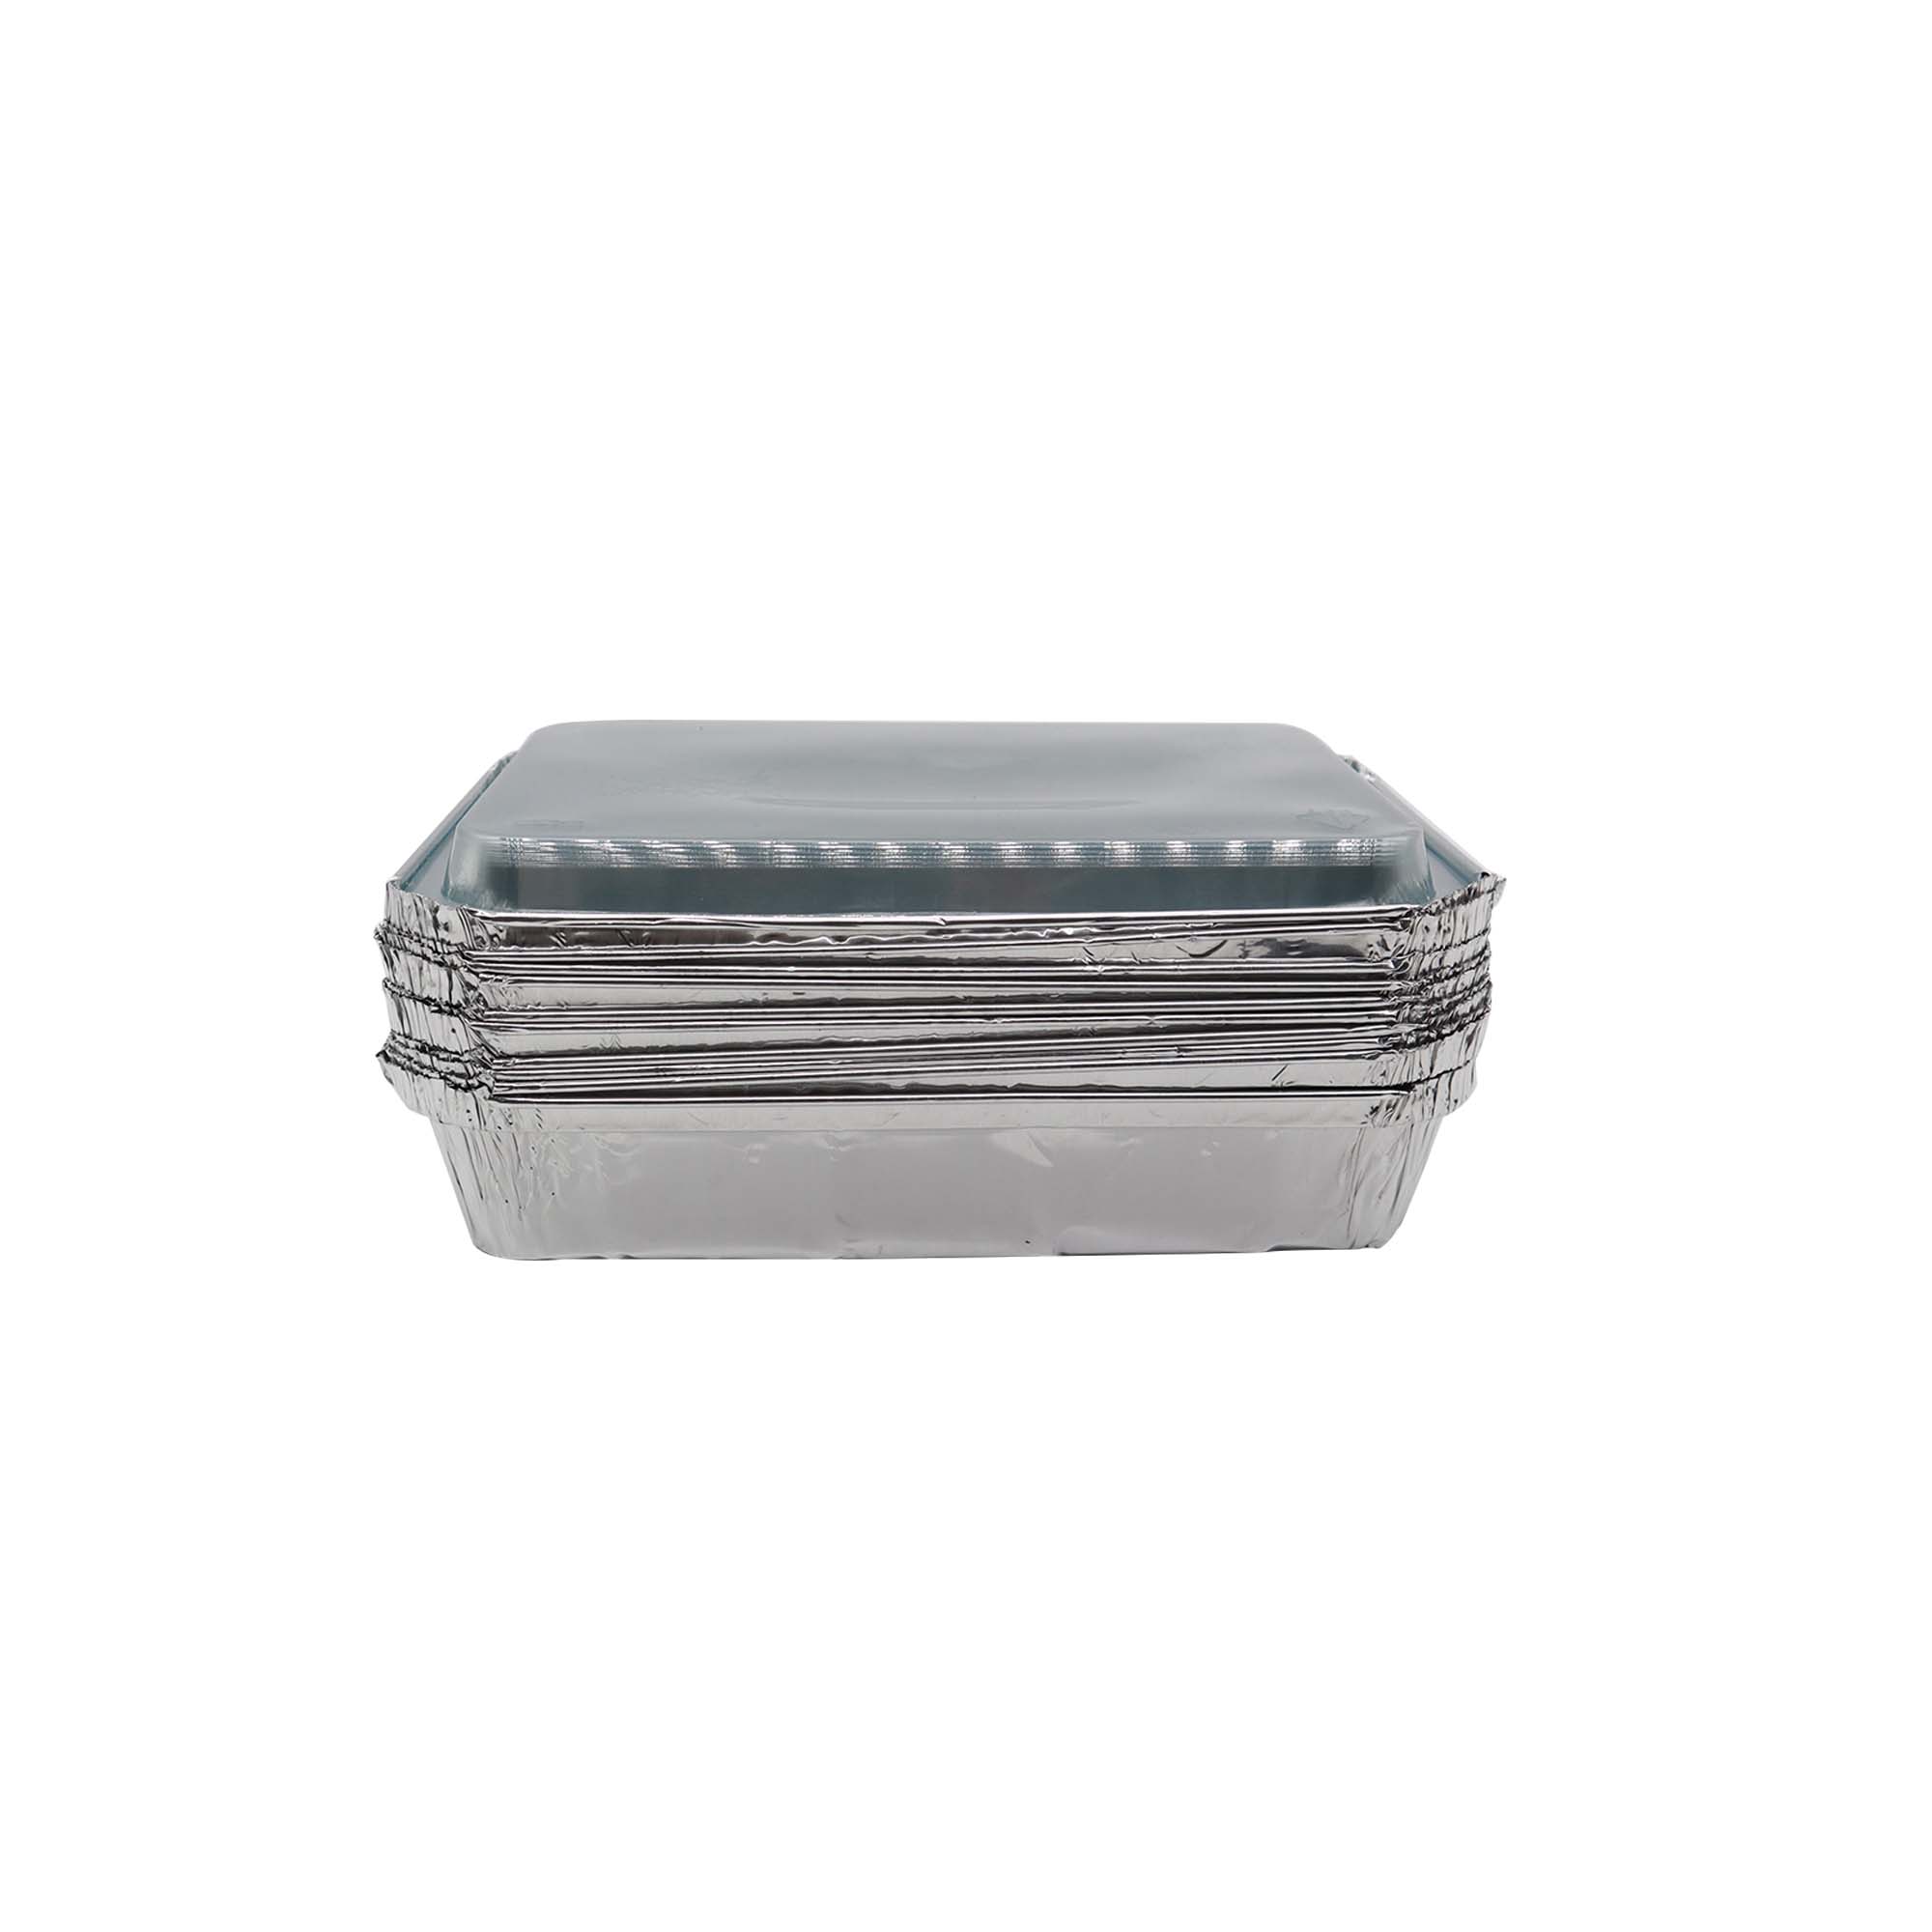 Aluminum Foil Tub - Lunch Meal Container Takeaway 4093P with Clear Lid FG-409PD each